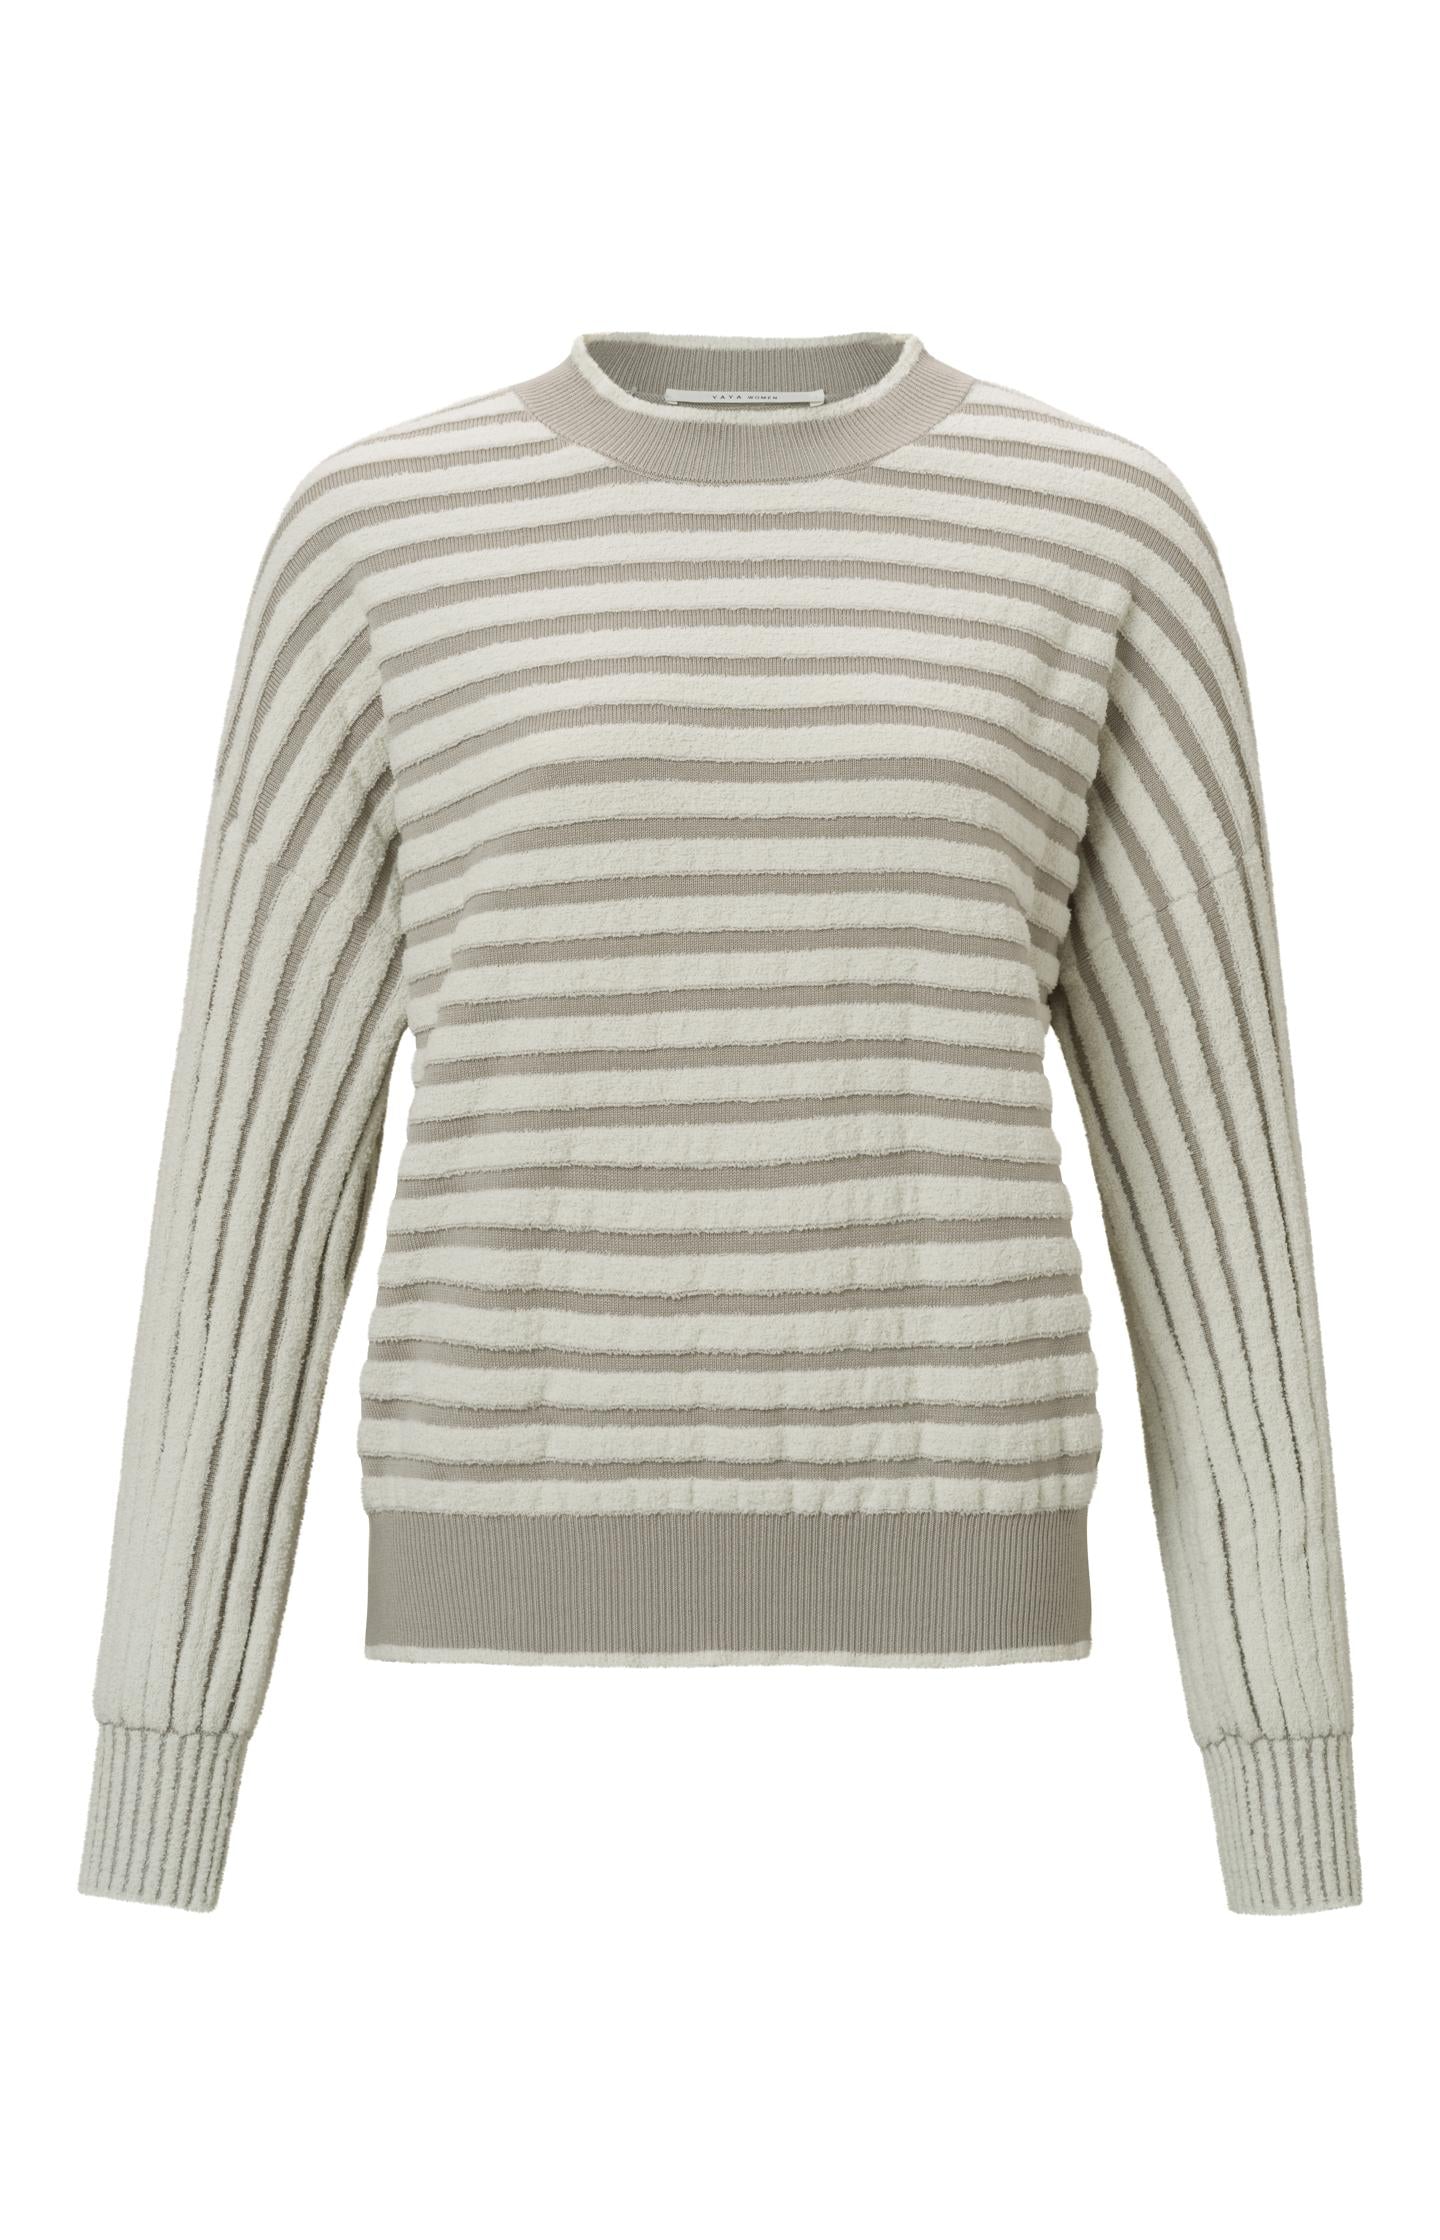 Striped sweater with crewneck, long sleeves and frayed seams - Type: product